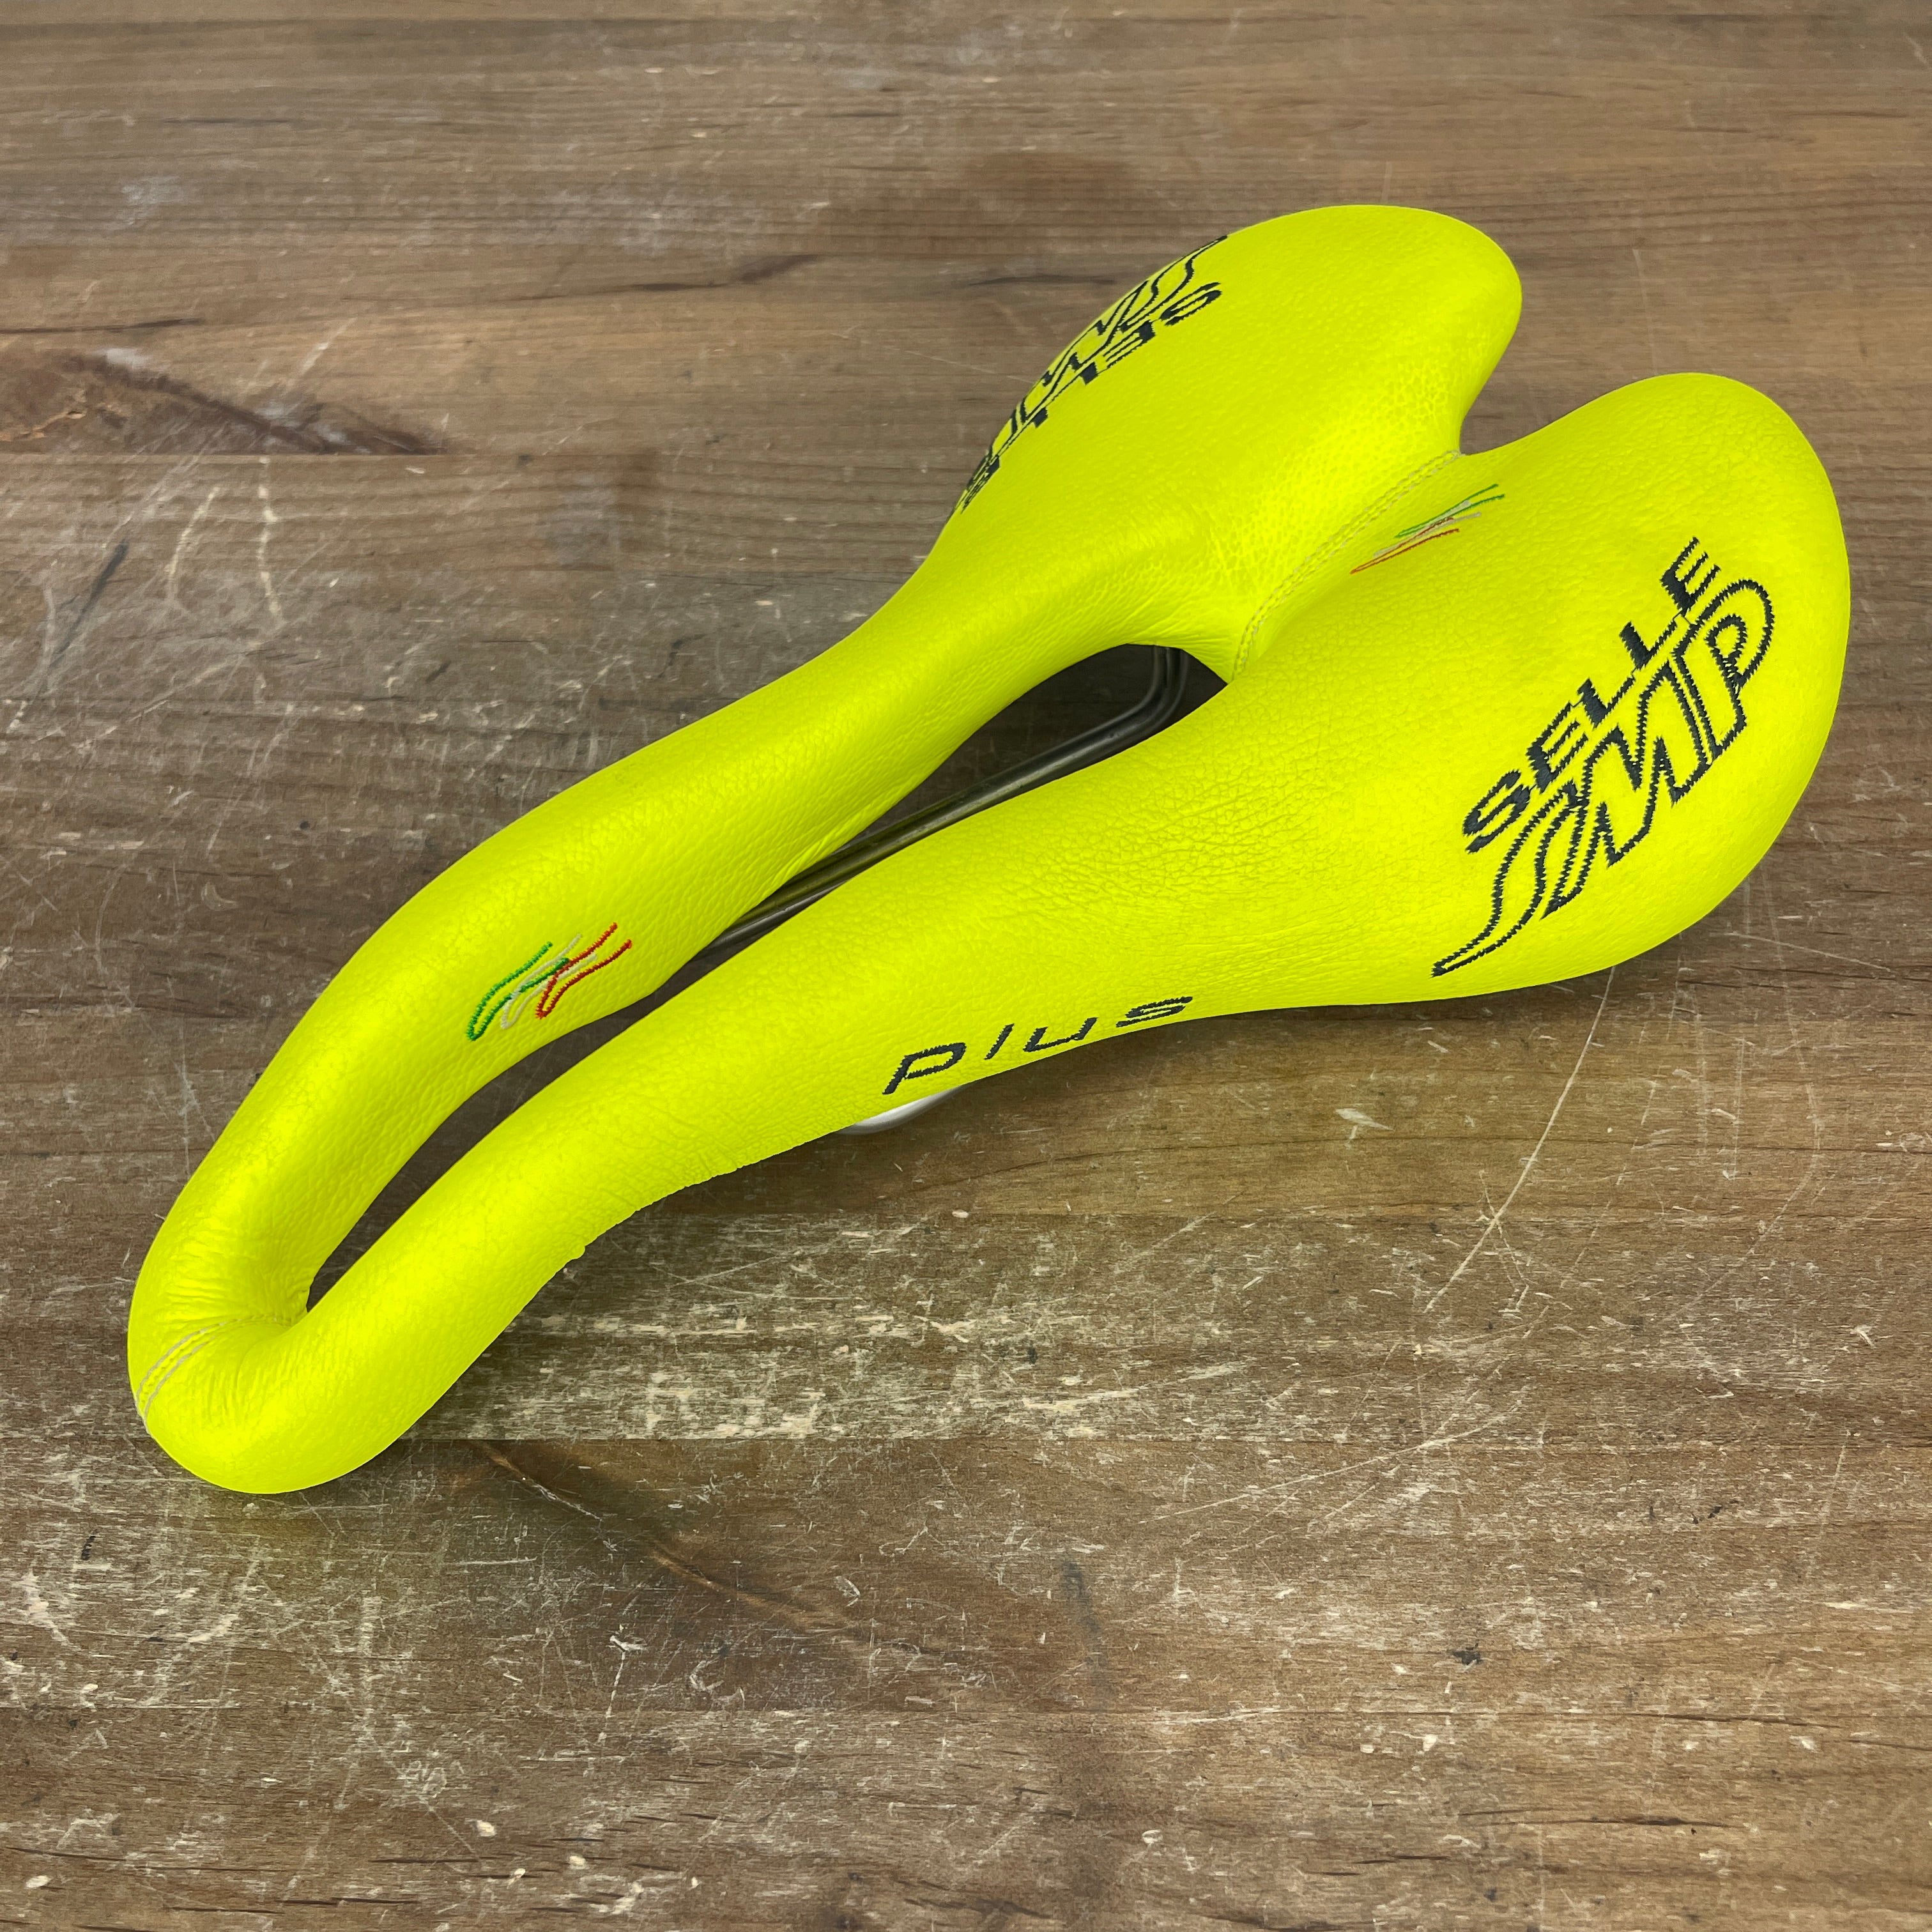 Selle SMP Plus 7x7mm Inox Rails Yellow Fluo Road Bike 159mm Saddle